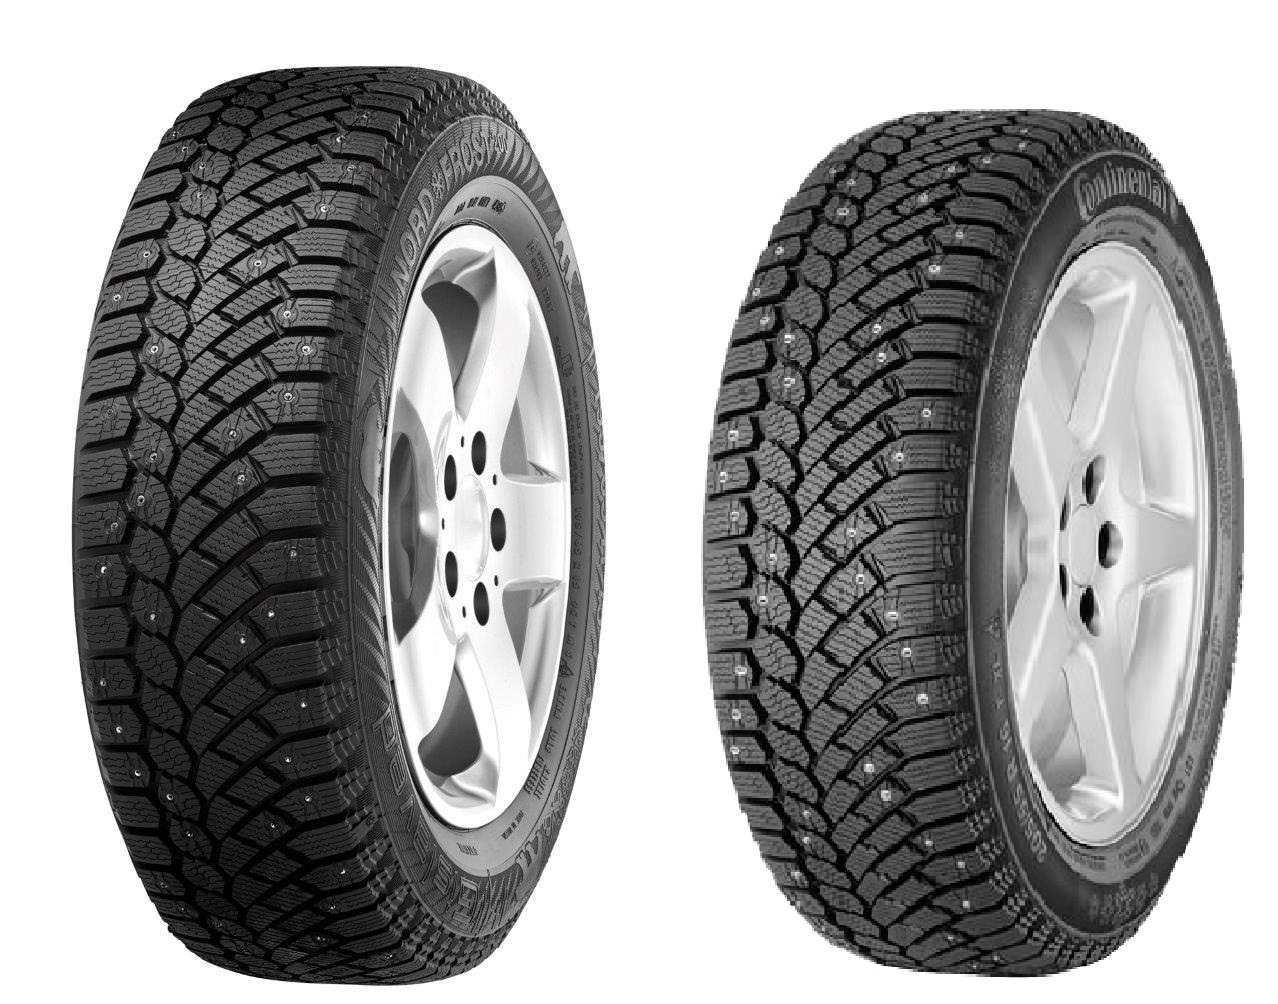 Gislaved frost 200 купить. Gislaved Nord Frost 200. Gislaved Nord Frost 200 SUV. Gislaved Nord*Frost 200 265/60 r18 114t. Nord Frost 200 ID XL 102t.